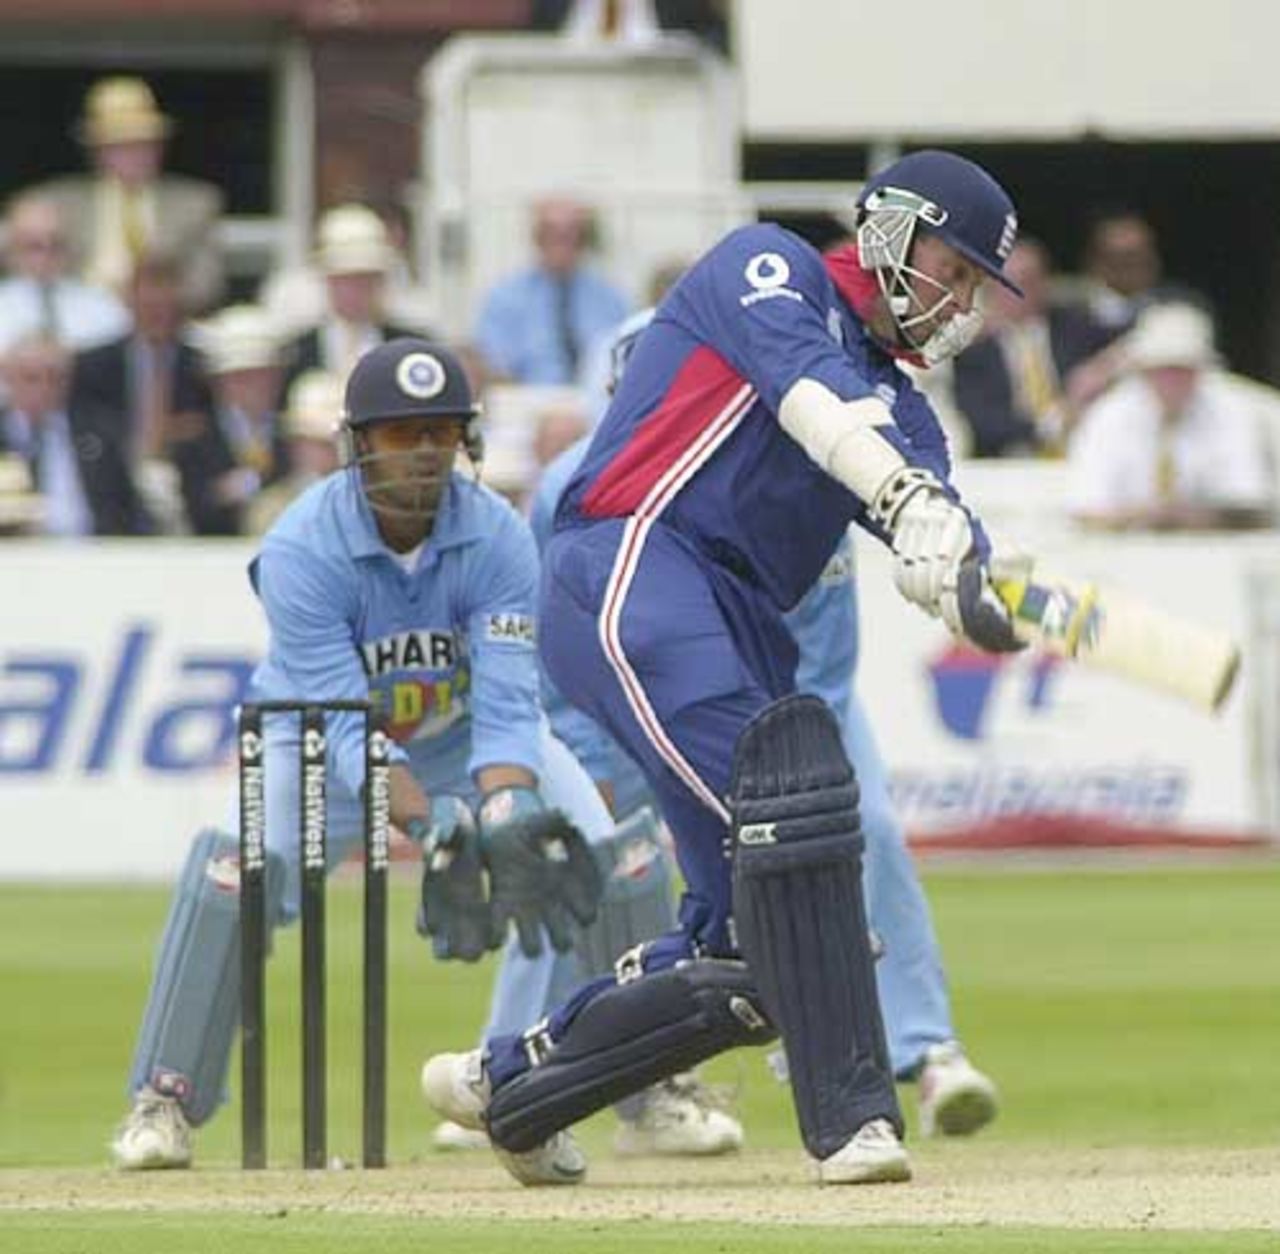 Marcus Trescothick with an off - drive on his way to another one day half-century, England v India at Lord's, June 2002